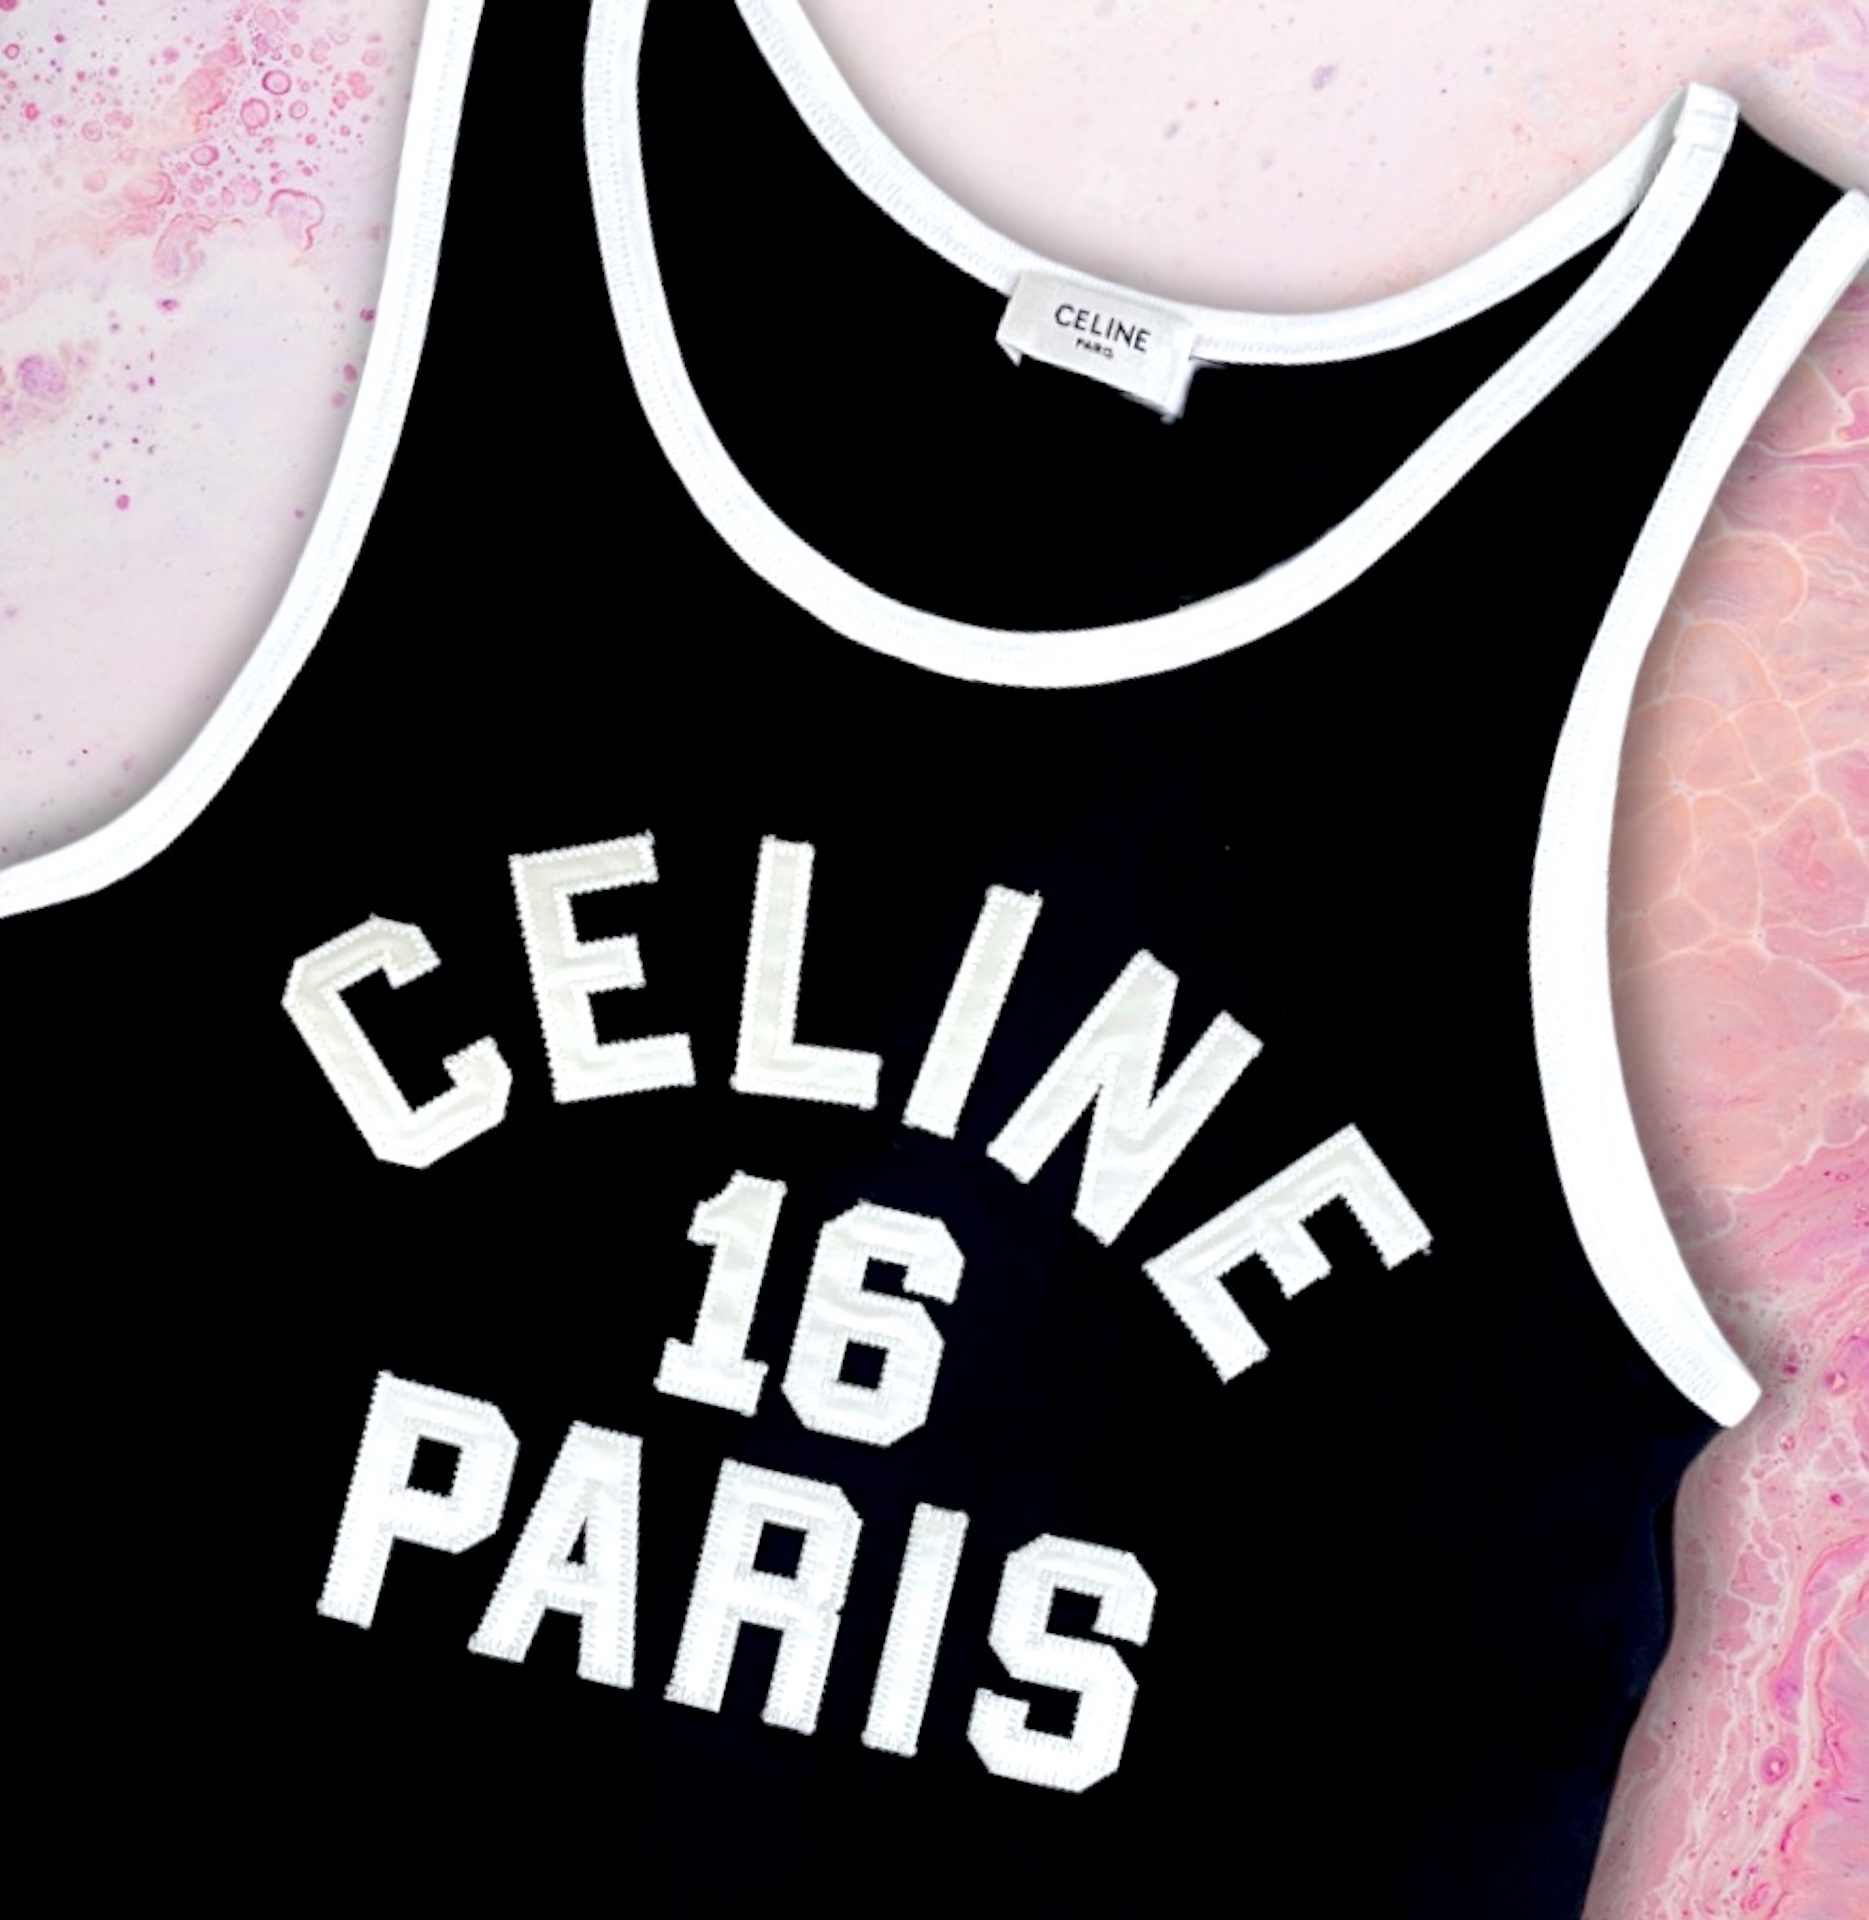 CELINE Jersey Tank - More Than You Can Imagine